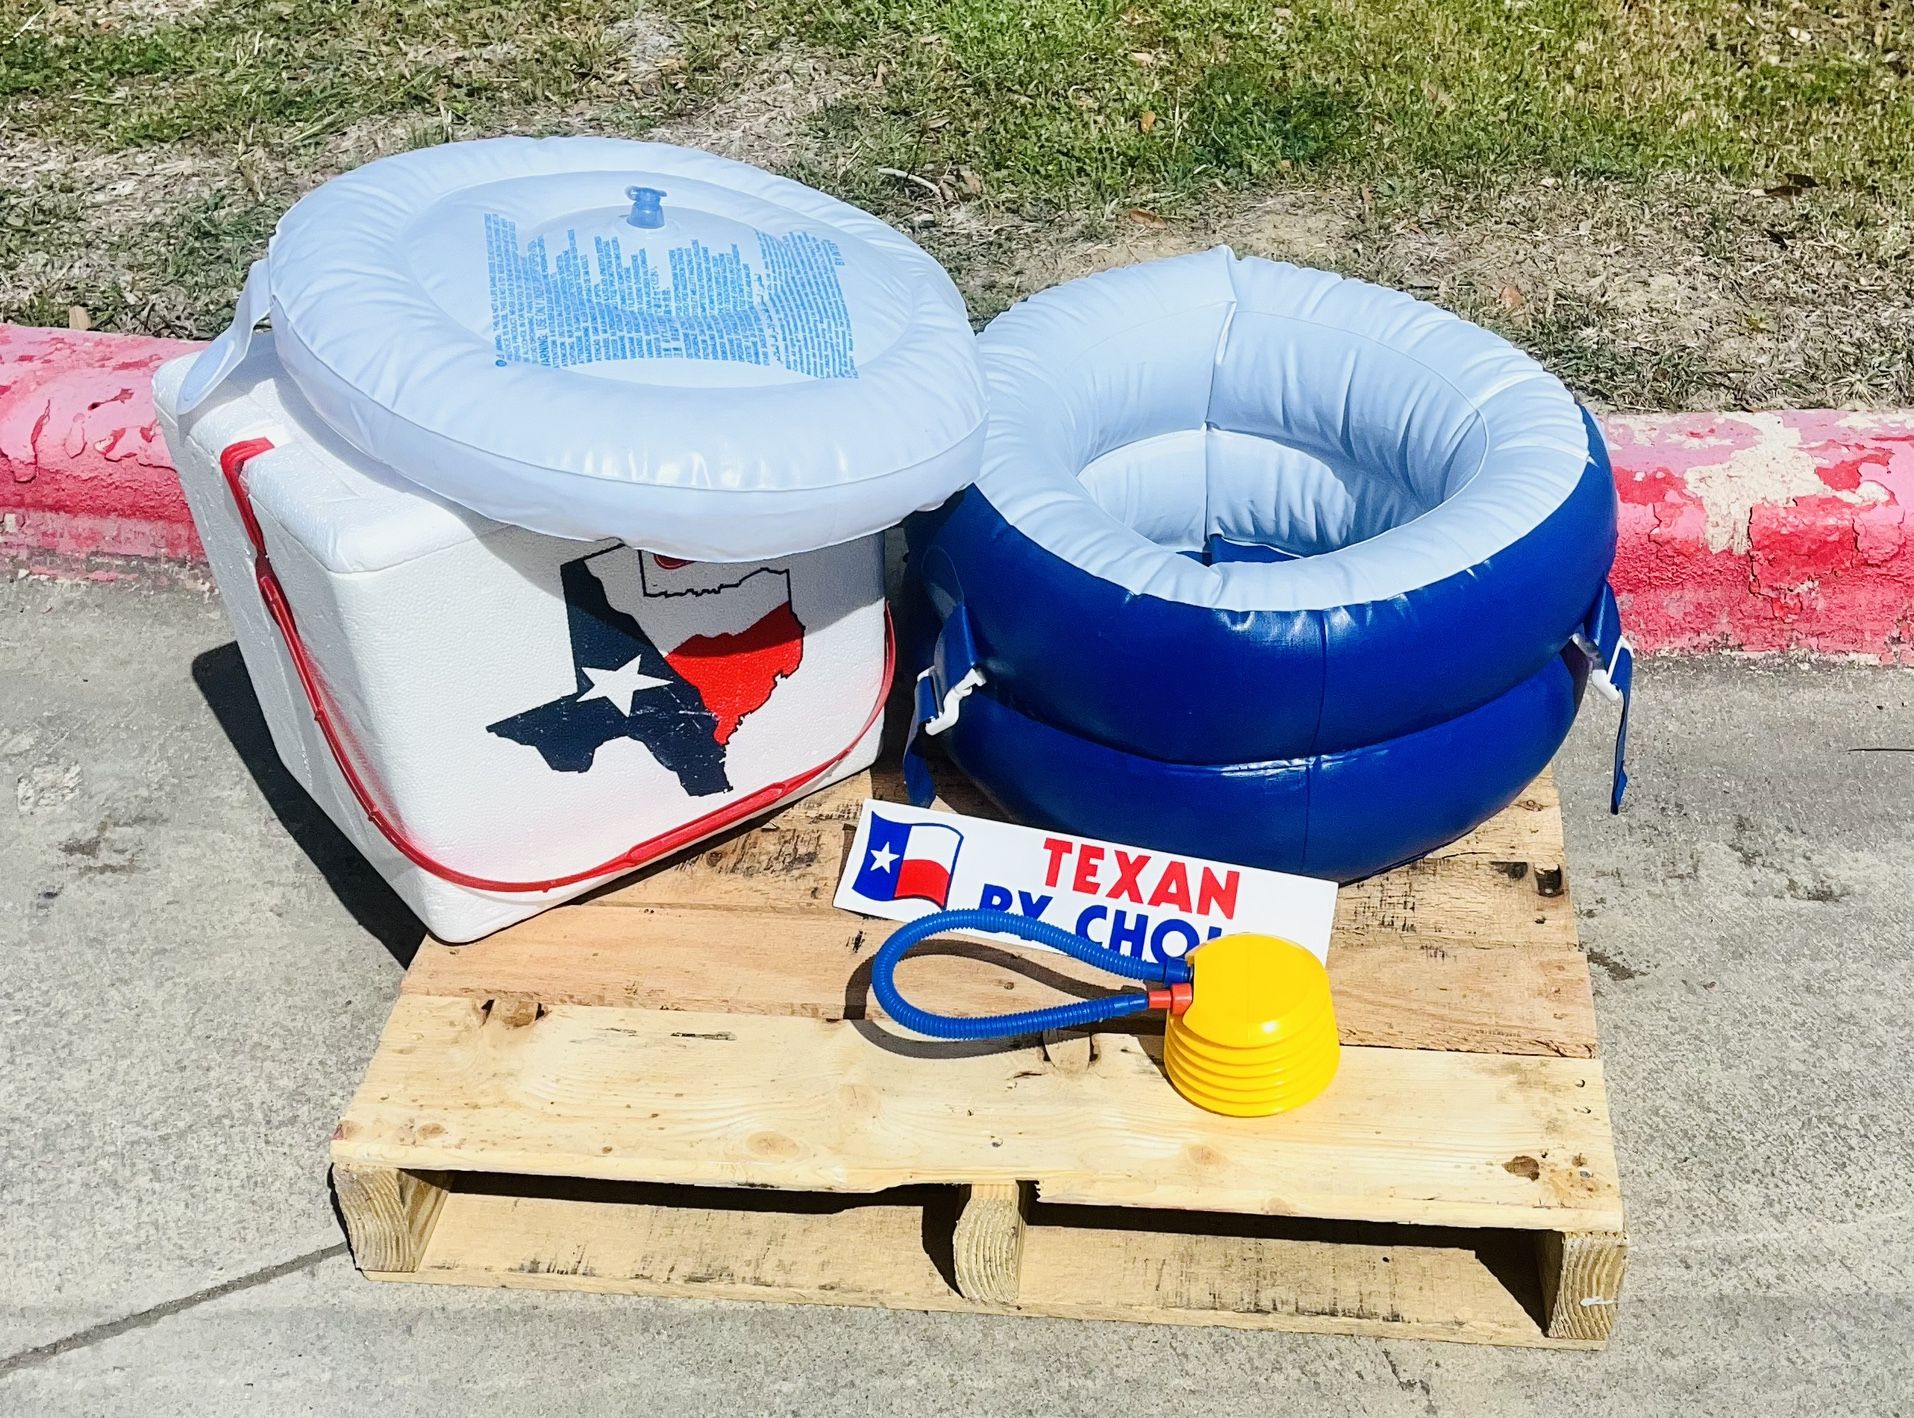 VINTAGE NEW INFLATABLE INNER-TUBE FOOT PUMP & INFLATABLE FLOATING COOLER & TEXAS PRIDE HEB STYROFOAM COOLER & TEXAN BY CHOICE BUMPER STICKER!! 